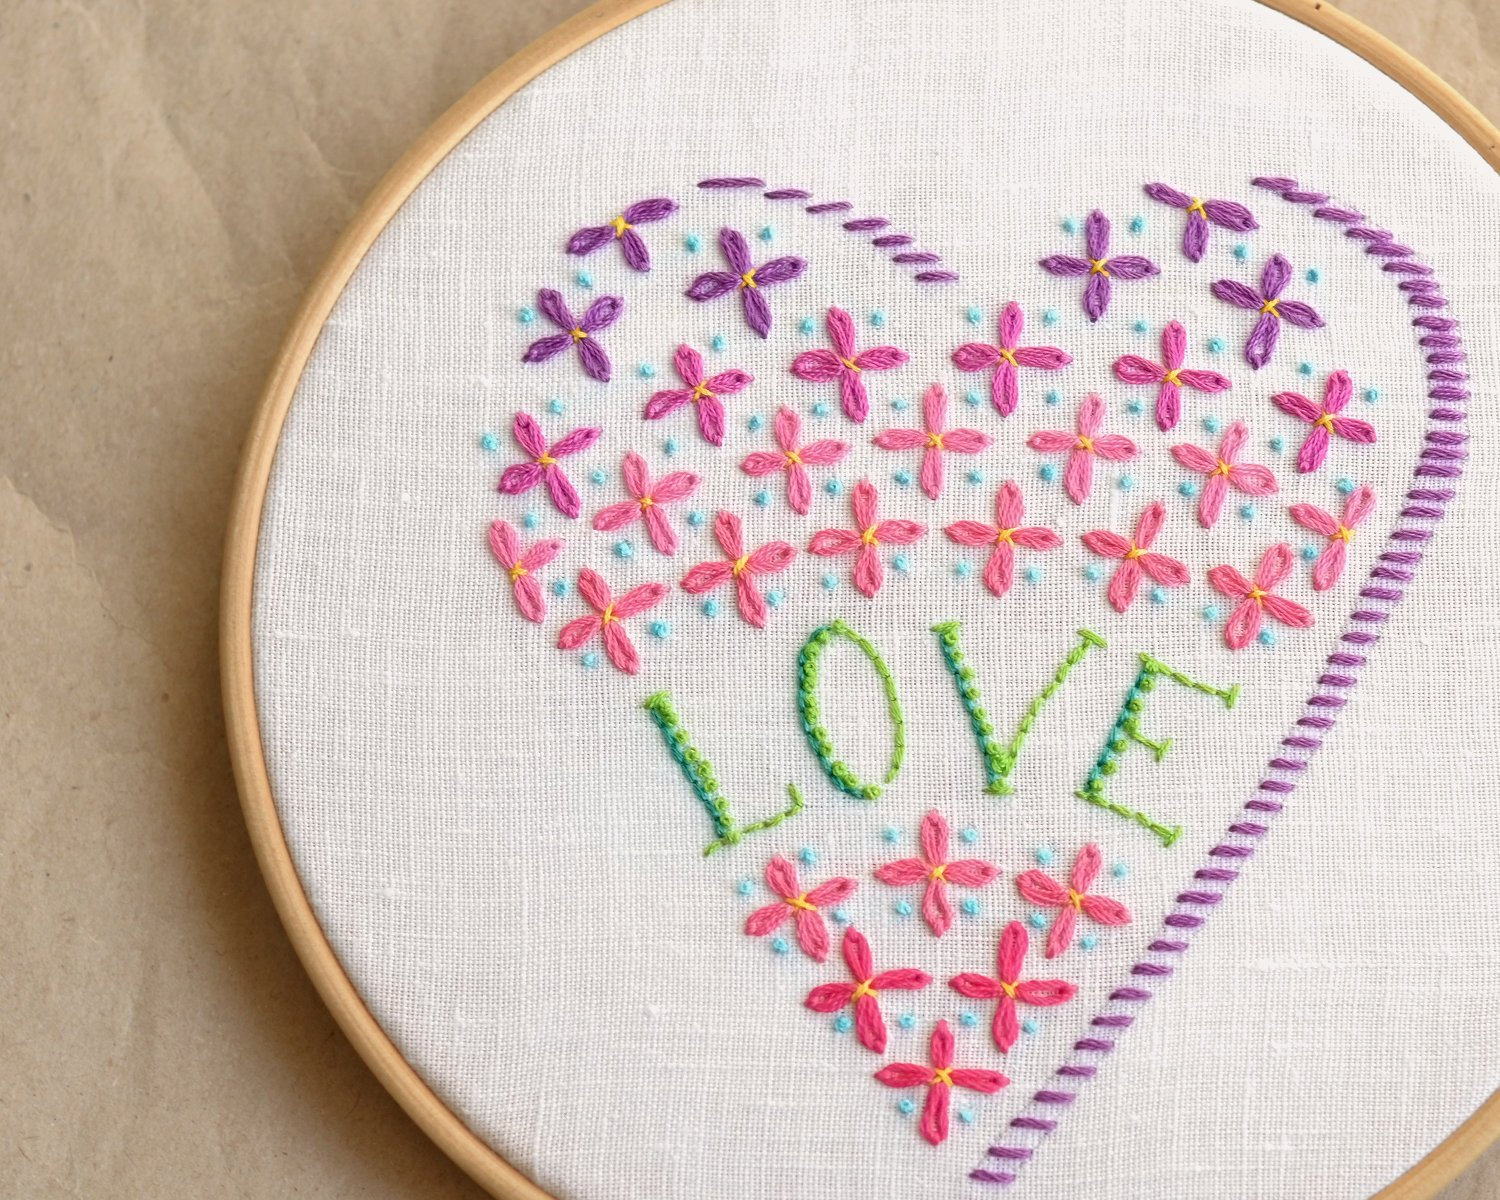 Embroidery Patterns Pdf Hand Embroidery Patterns Pdf Valentine Embroidery Design Diy Naiveneedle